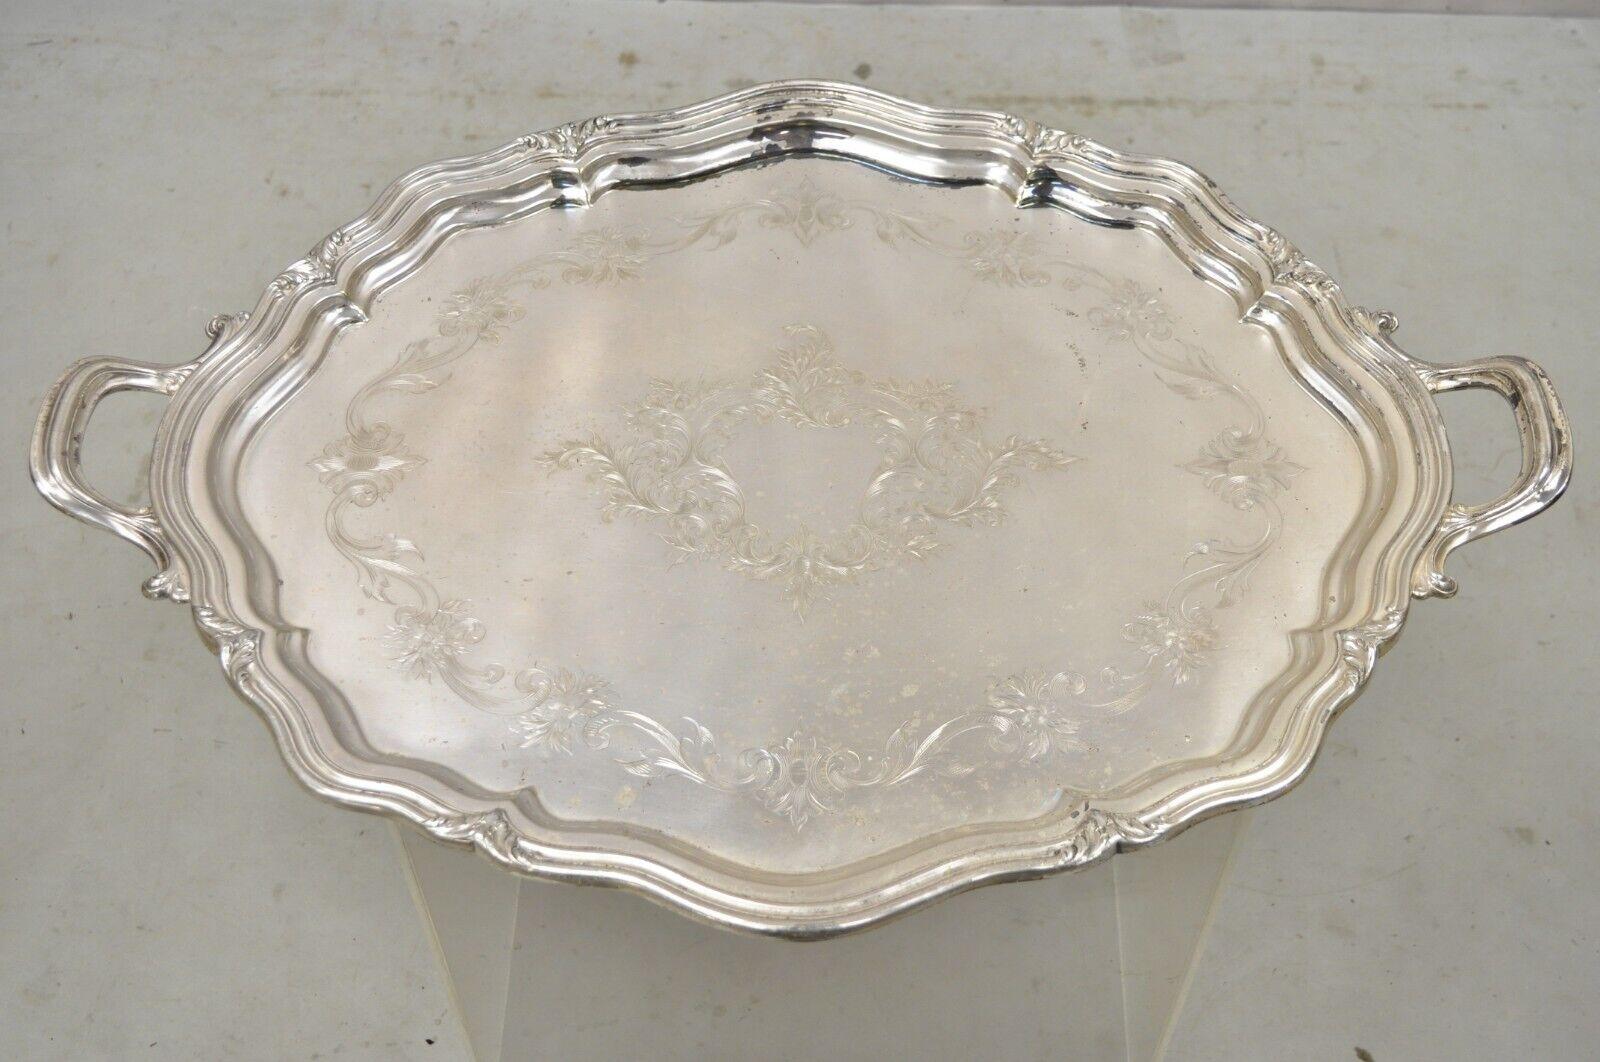 Antique Reed & Barton EPNS 06143 Silver Plated Handle Tray Serving Platter. Item features an ornate etched center, ornate twin handles, very nice vintage item, great style and form. circa Early 20th century. Measurements: 1.75